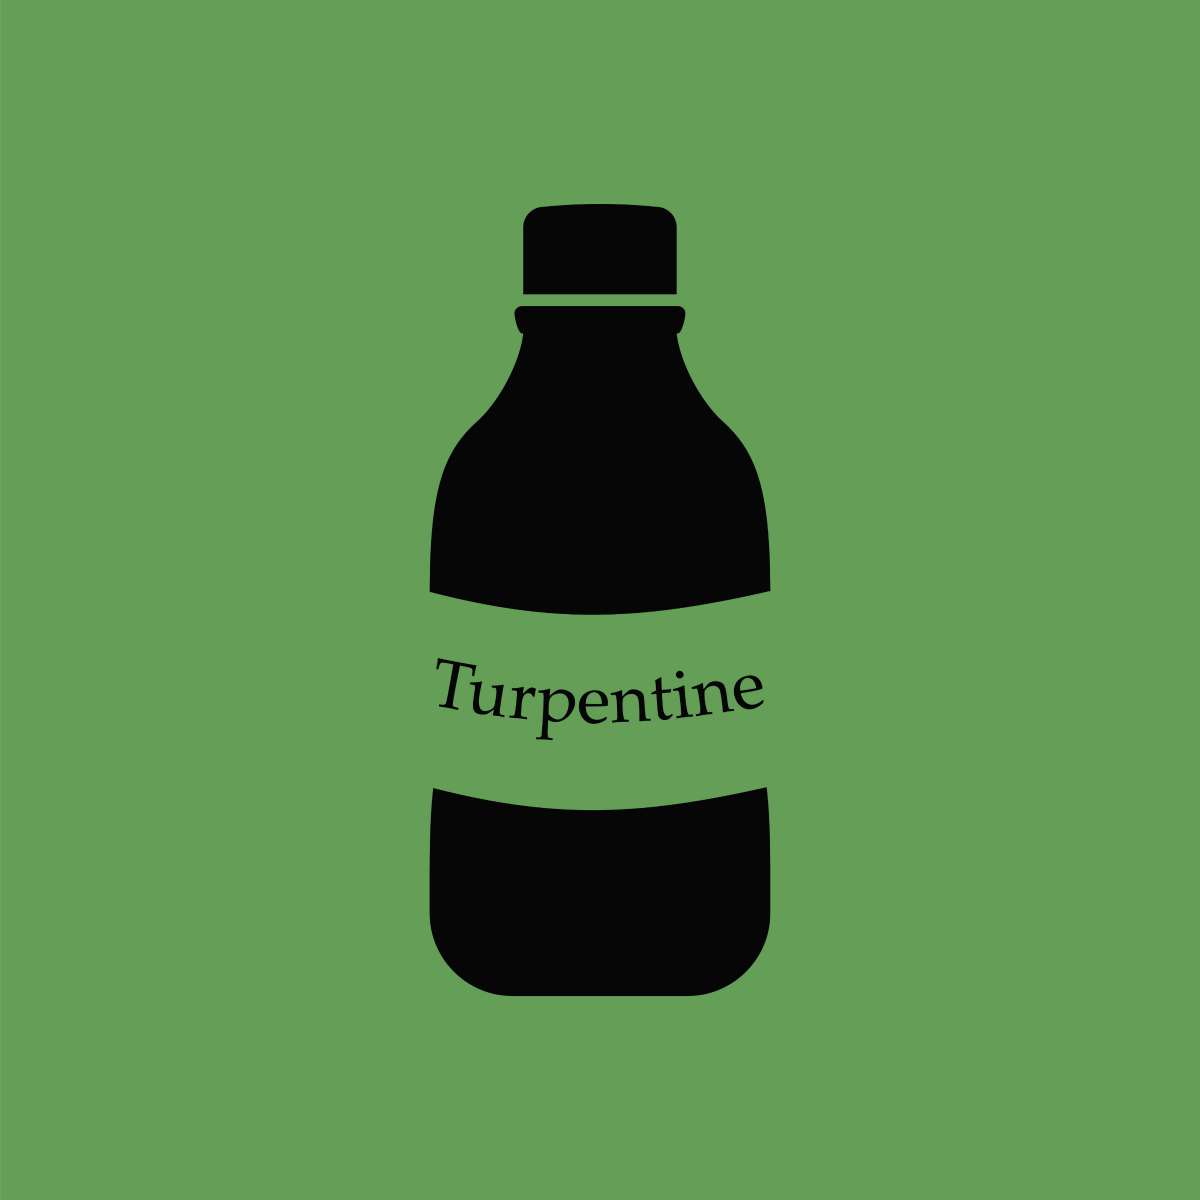 Turpentine Bottle Design | Easy Ways To Make Homemade Waterproof Matches